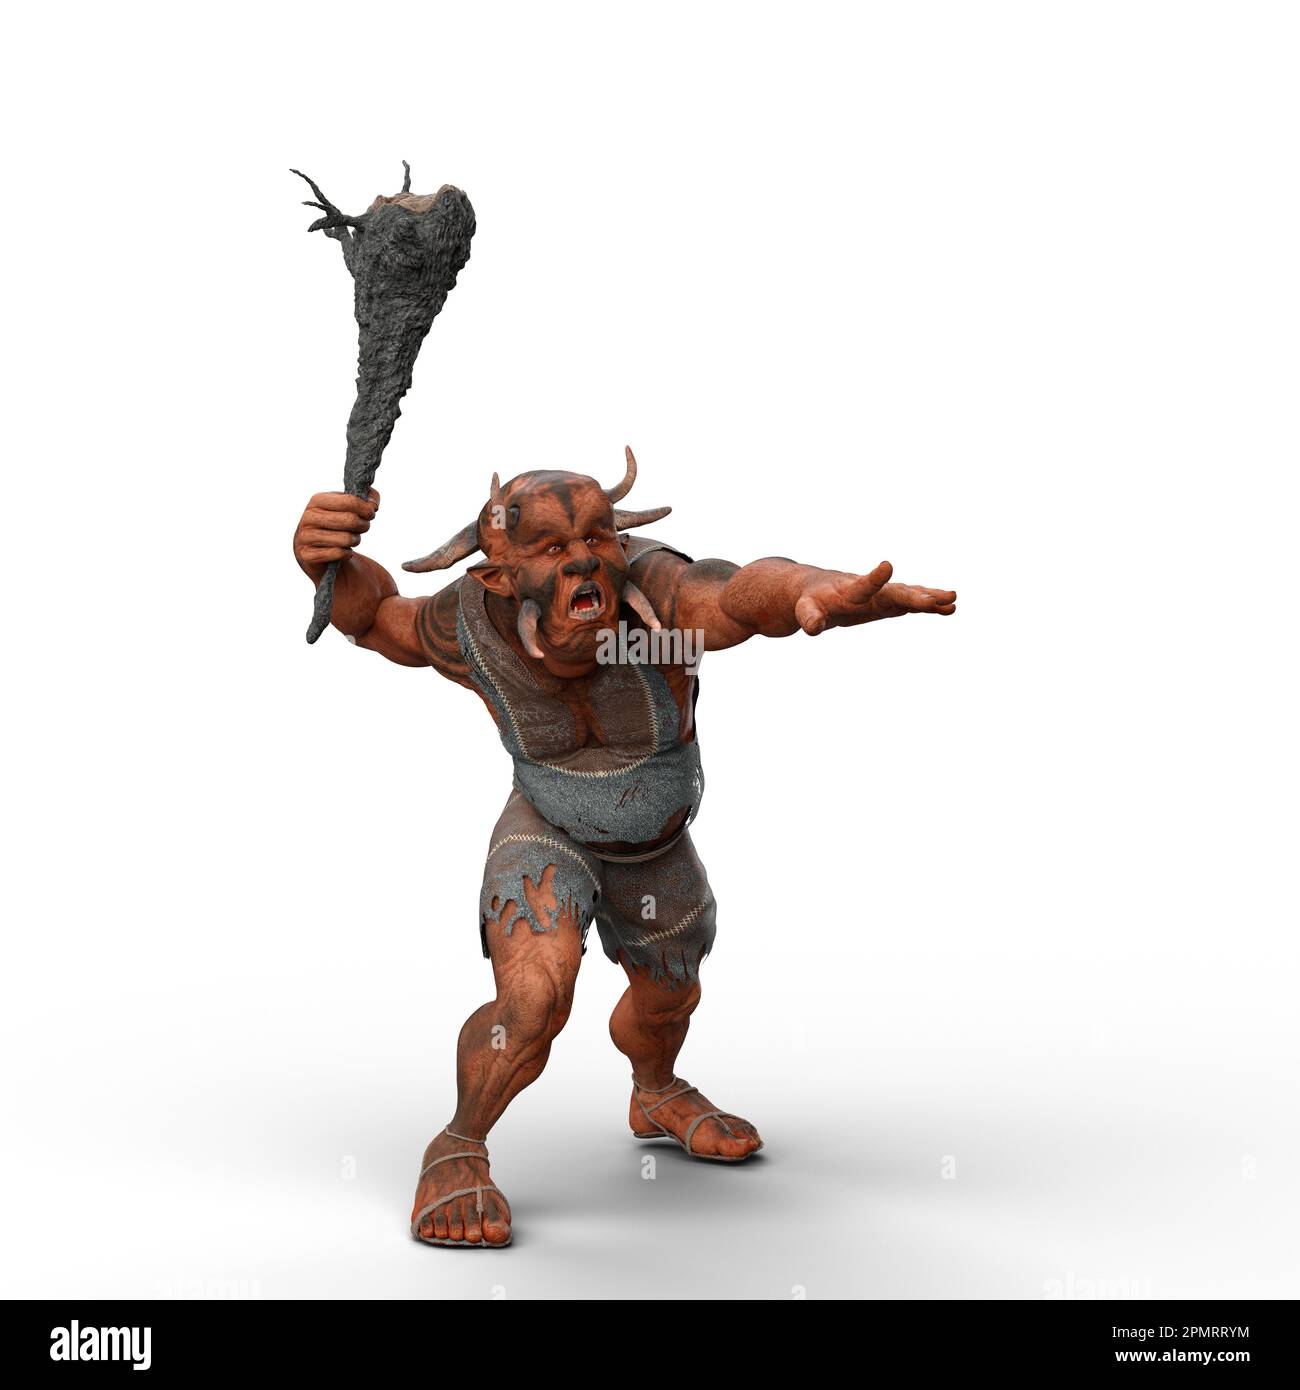 3D illustration of a Troll fantasy creature weilding a large wooden club weapon isolated on a white background. Stock Photo